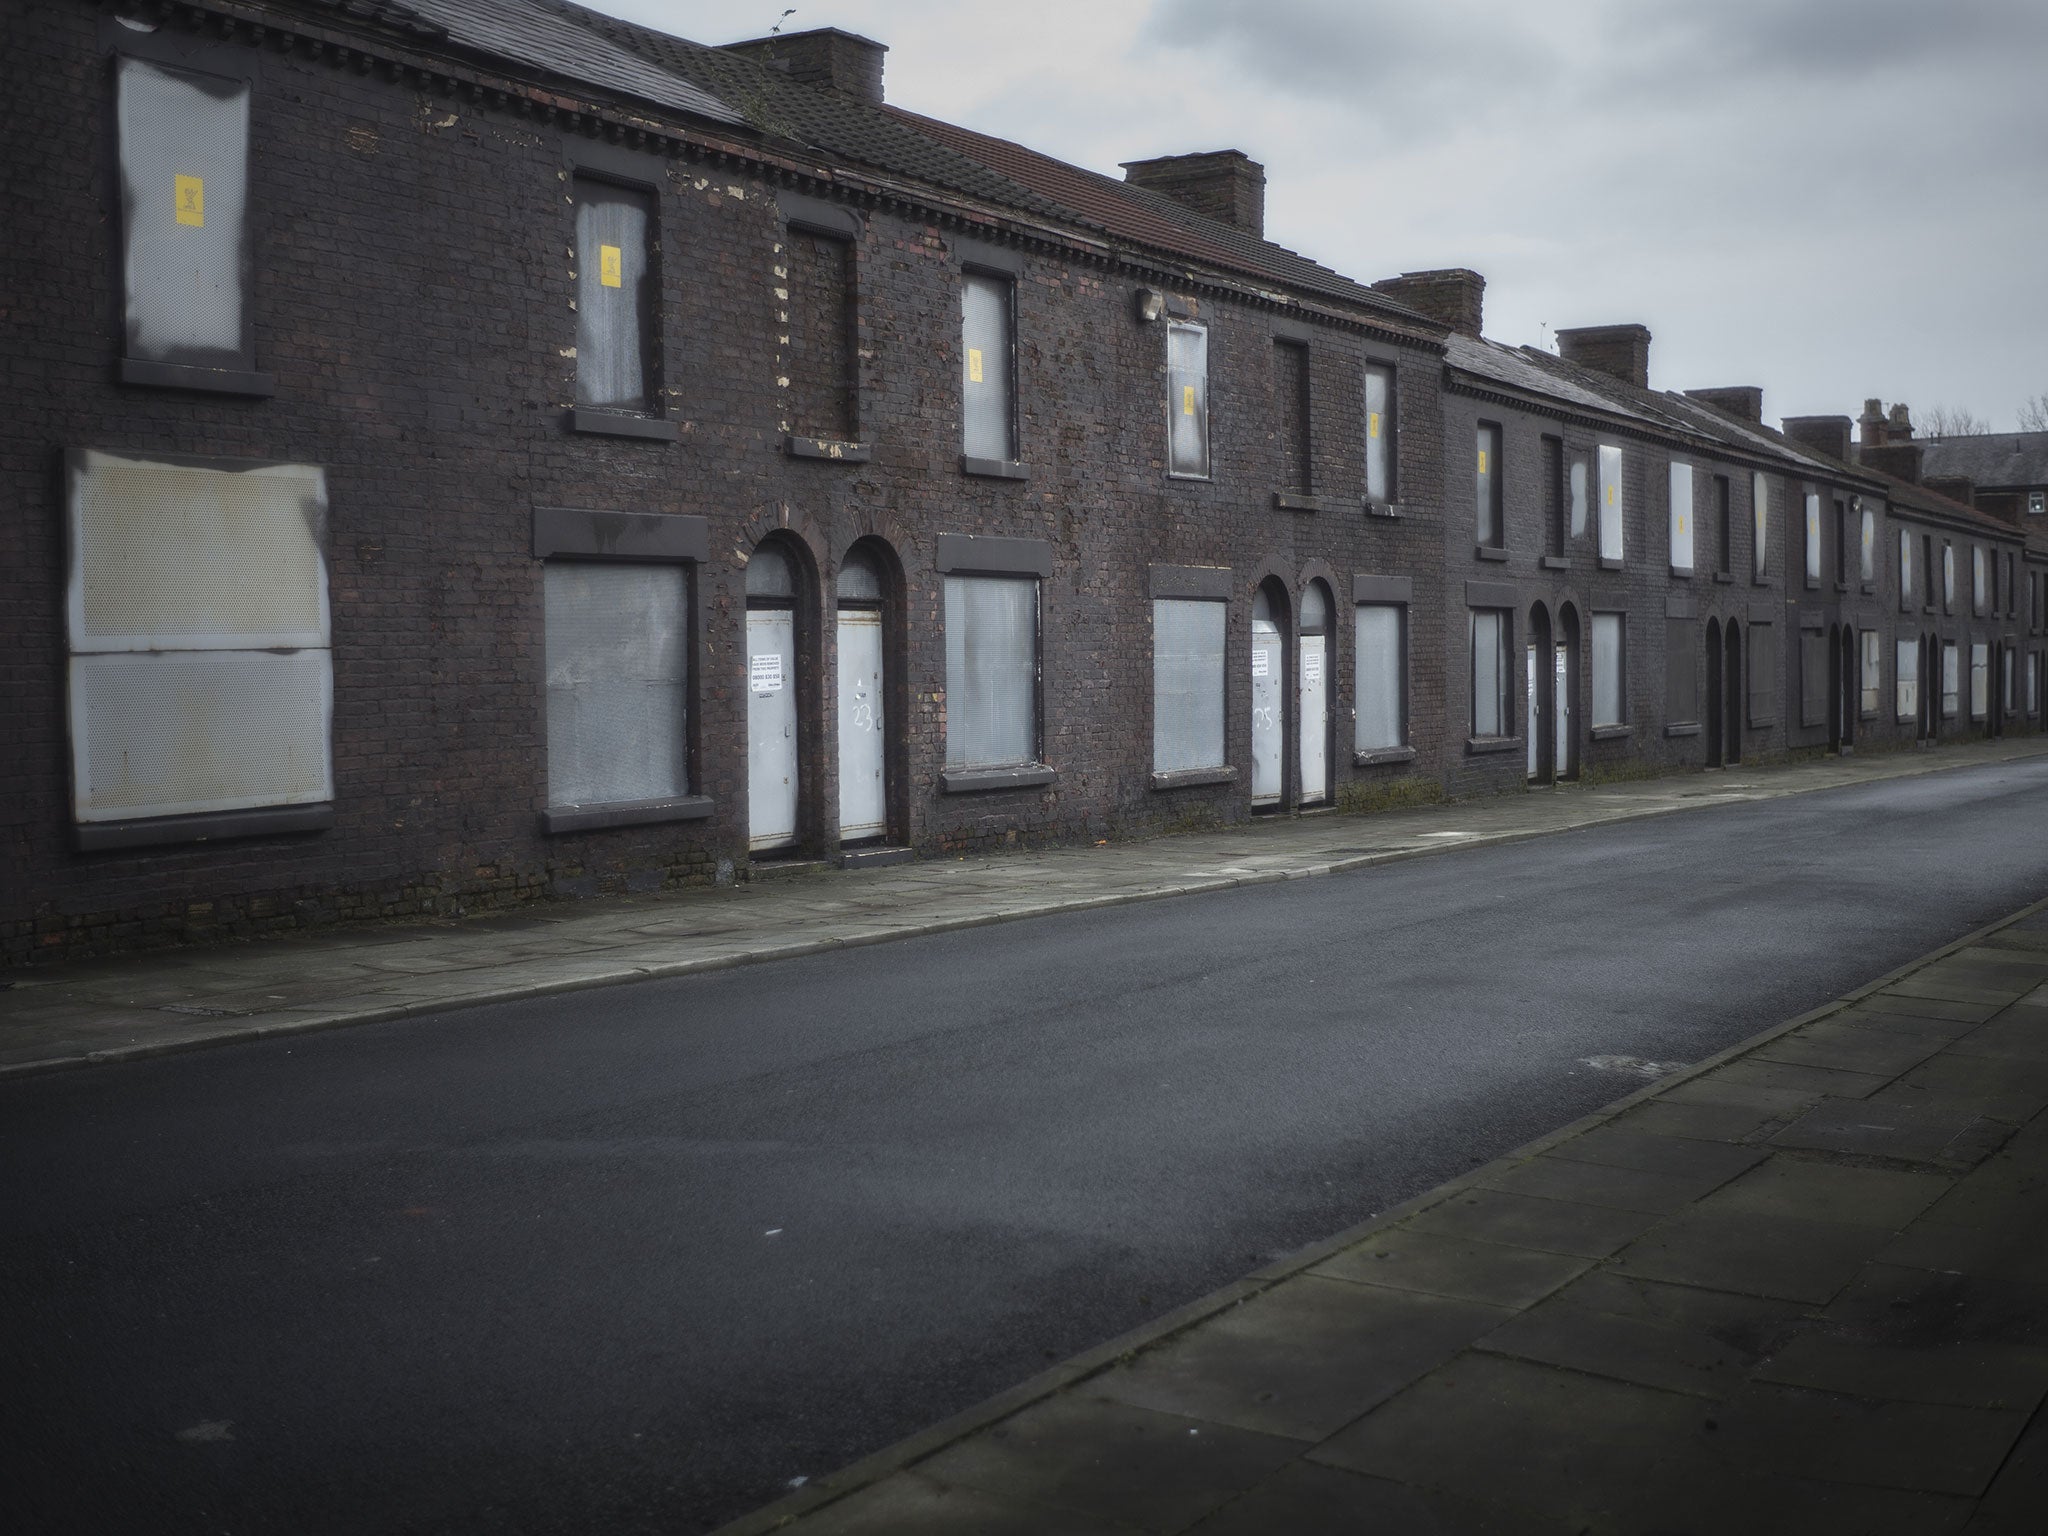 Derelict homes wait for their fate in Toxteth, Liverpool